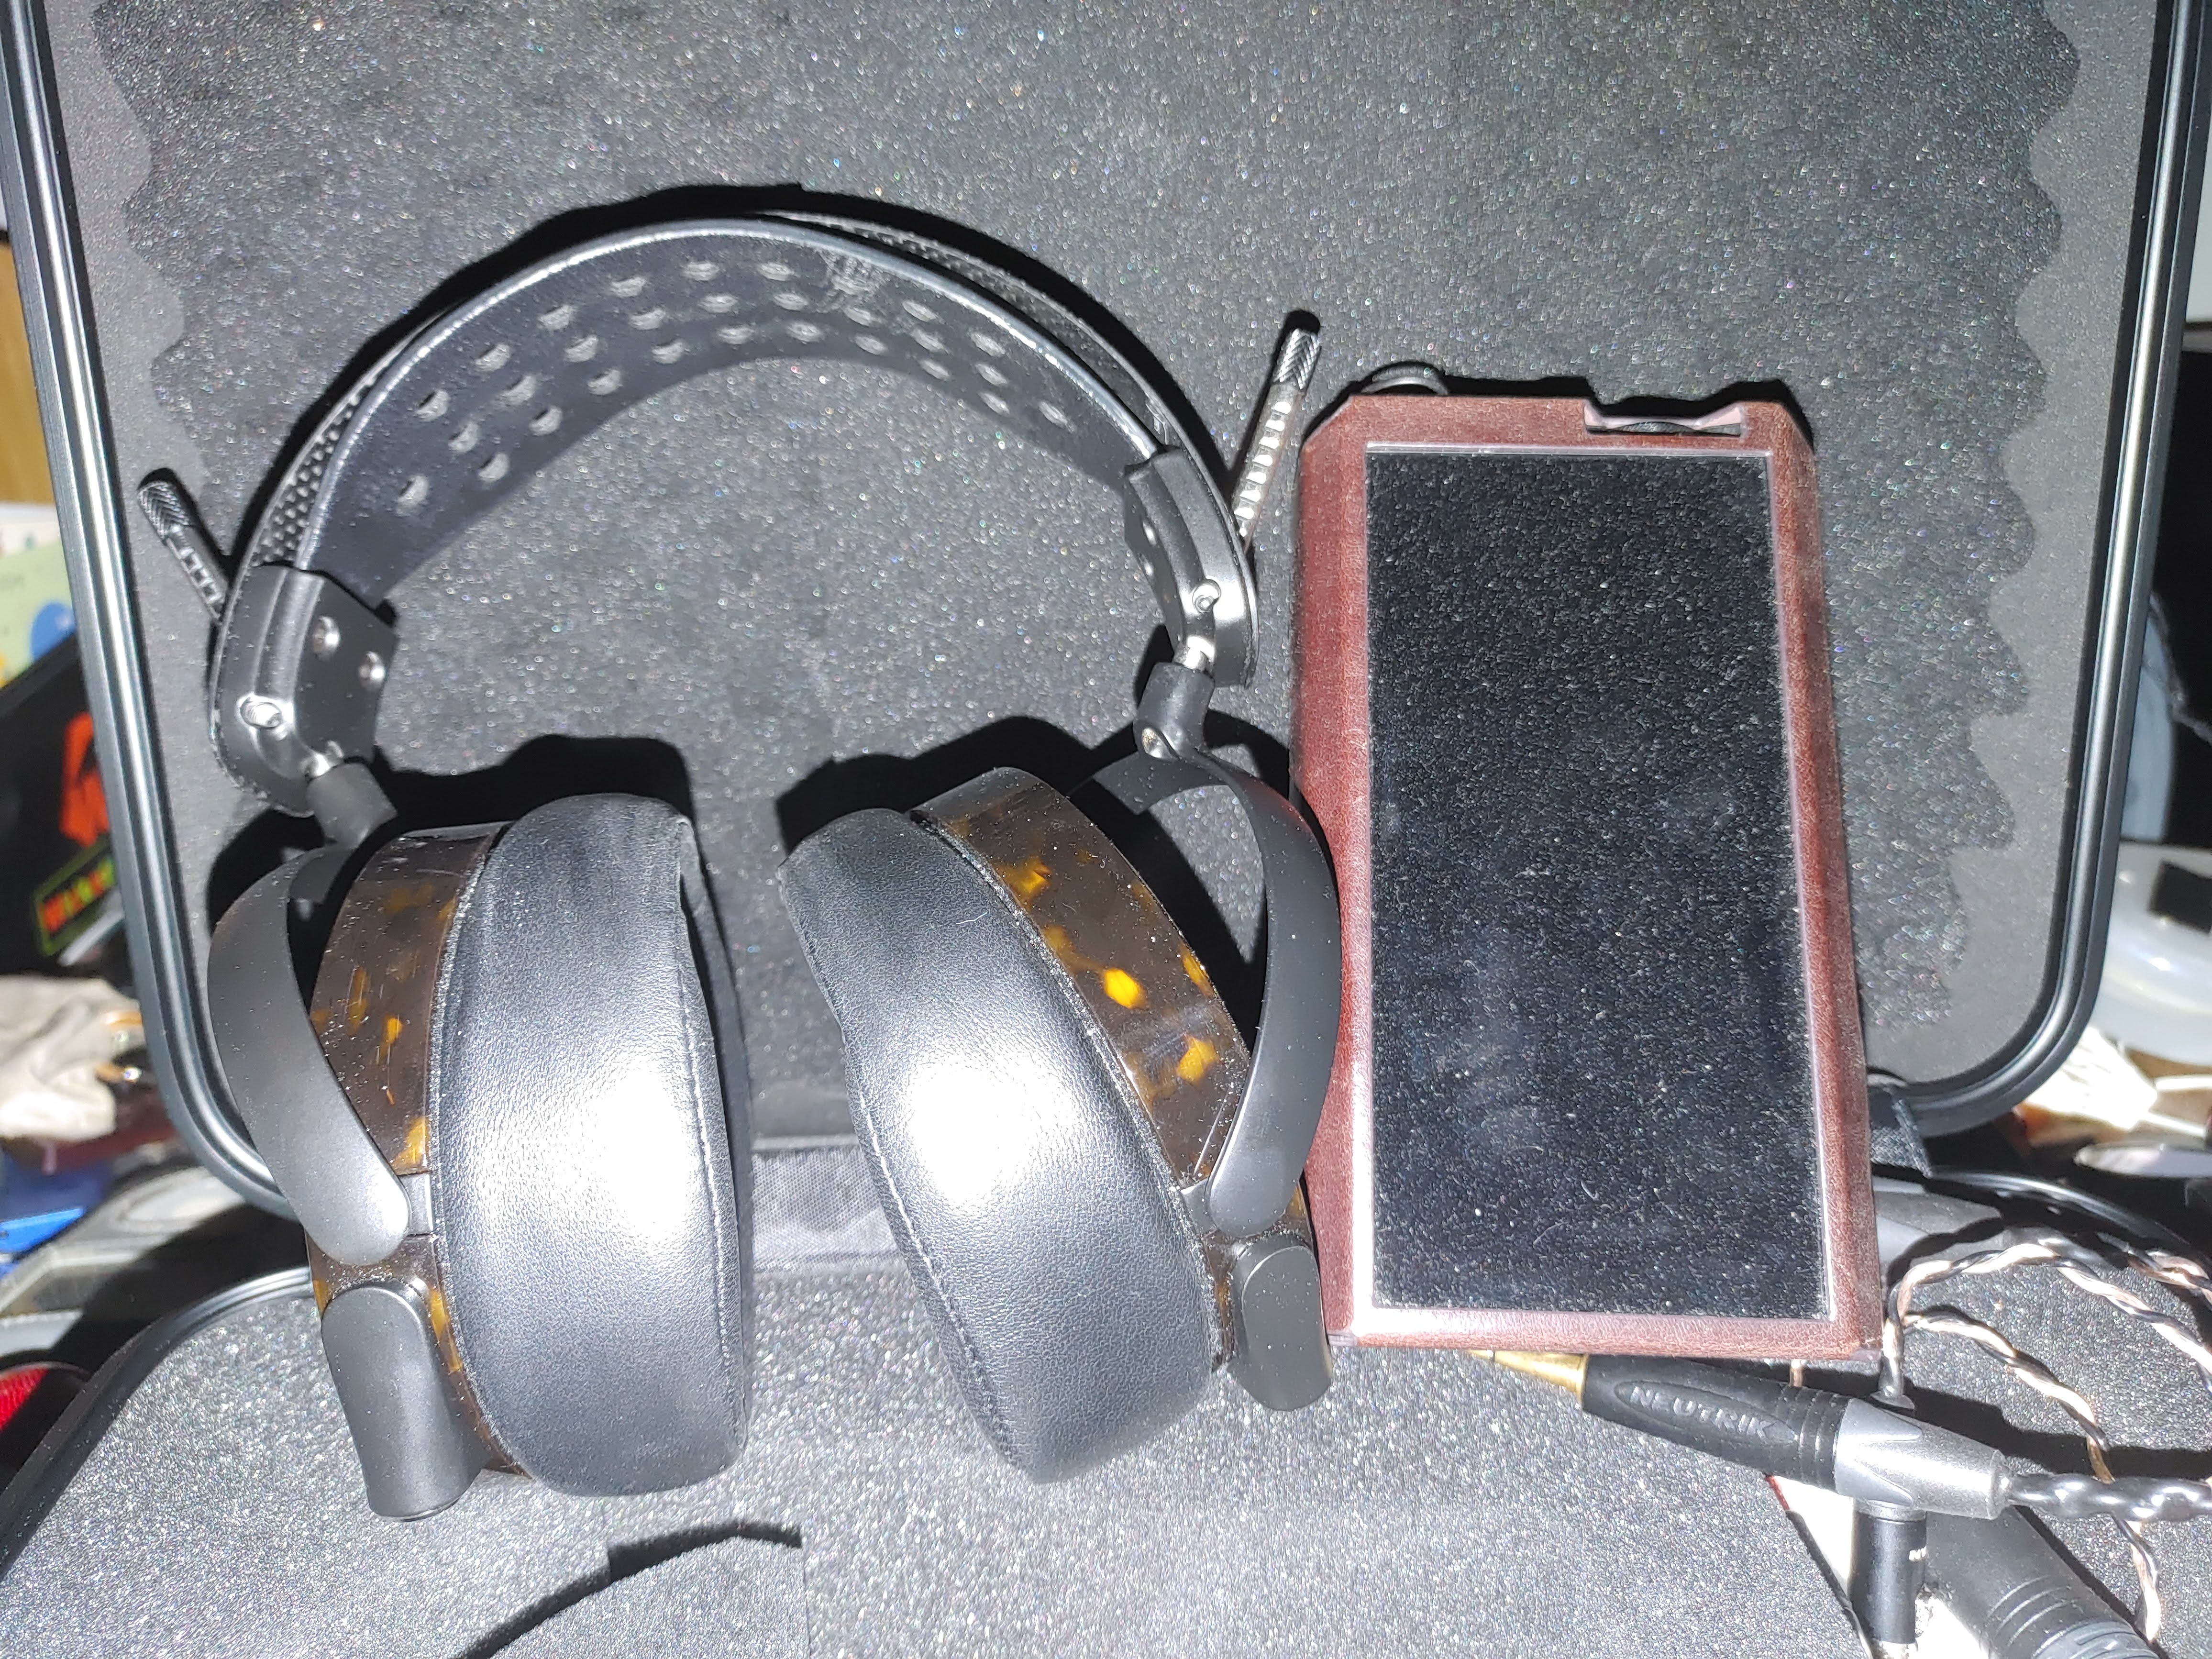 Welcome to the Reference Class – Beyerdynamic DT 770 PRO 80 Ohm Headphone  Review - Major HiFi